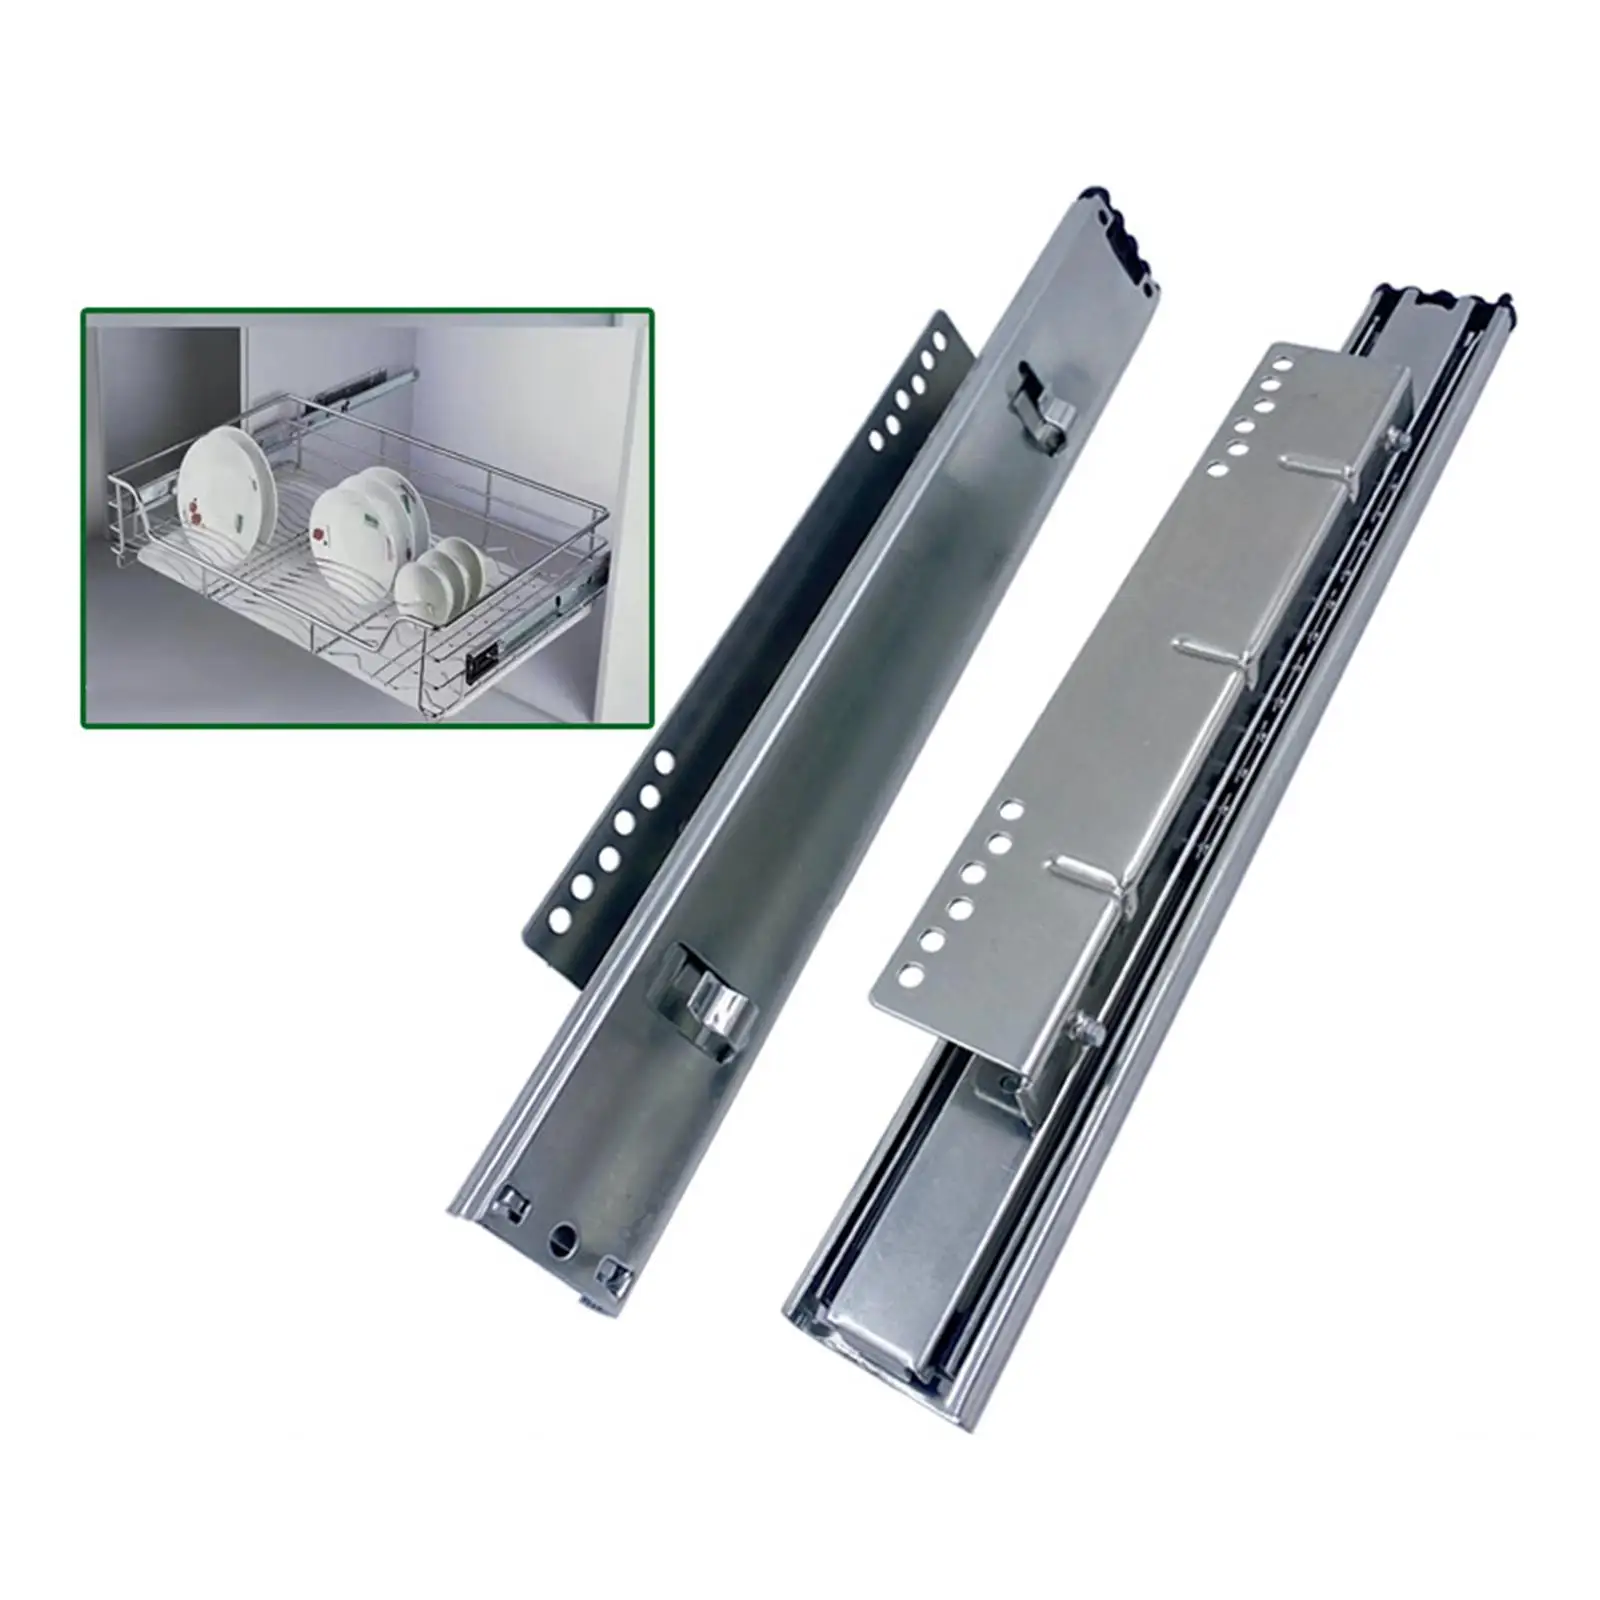 1 Pair Drawer Slides Heavy Duty Drawer Runners for Furniture Cabinet Kitchen